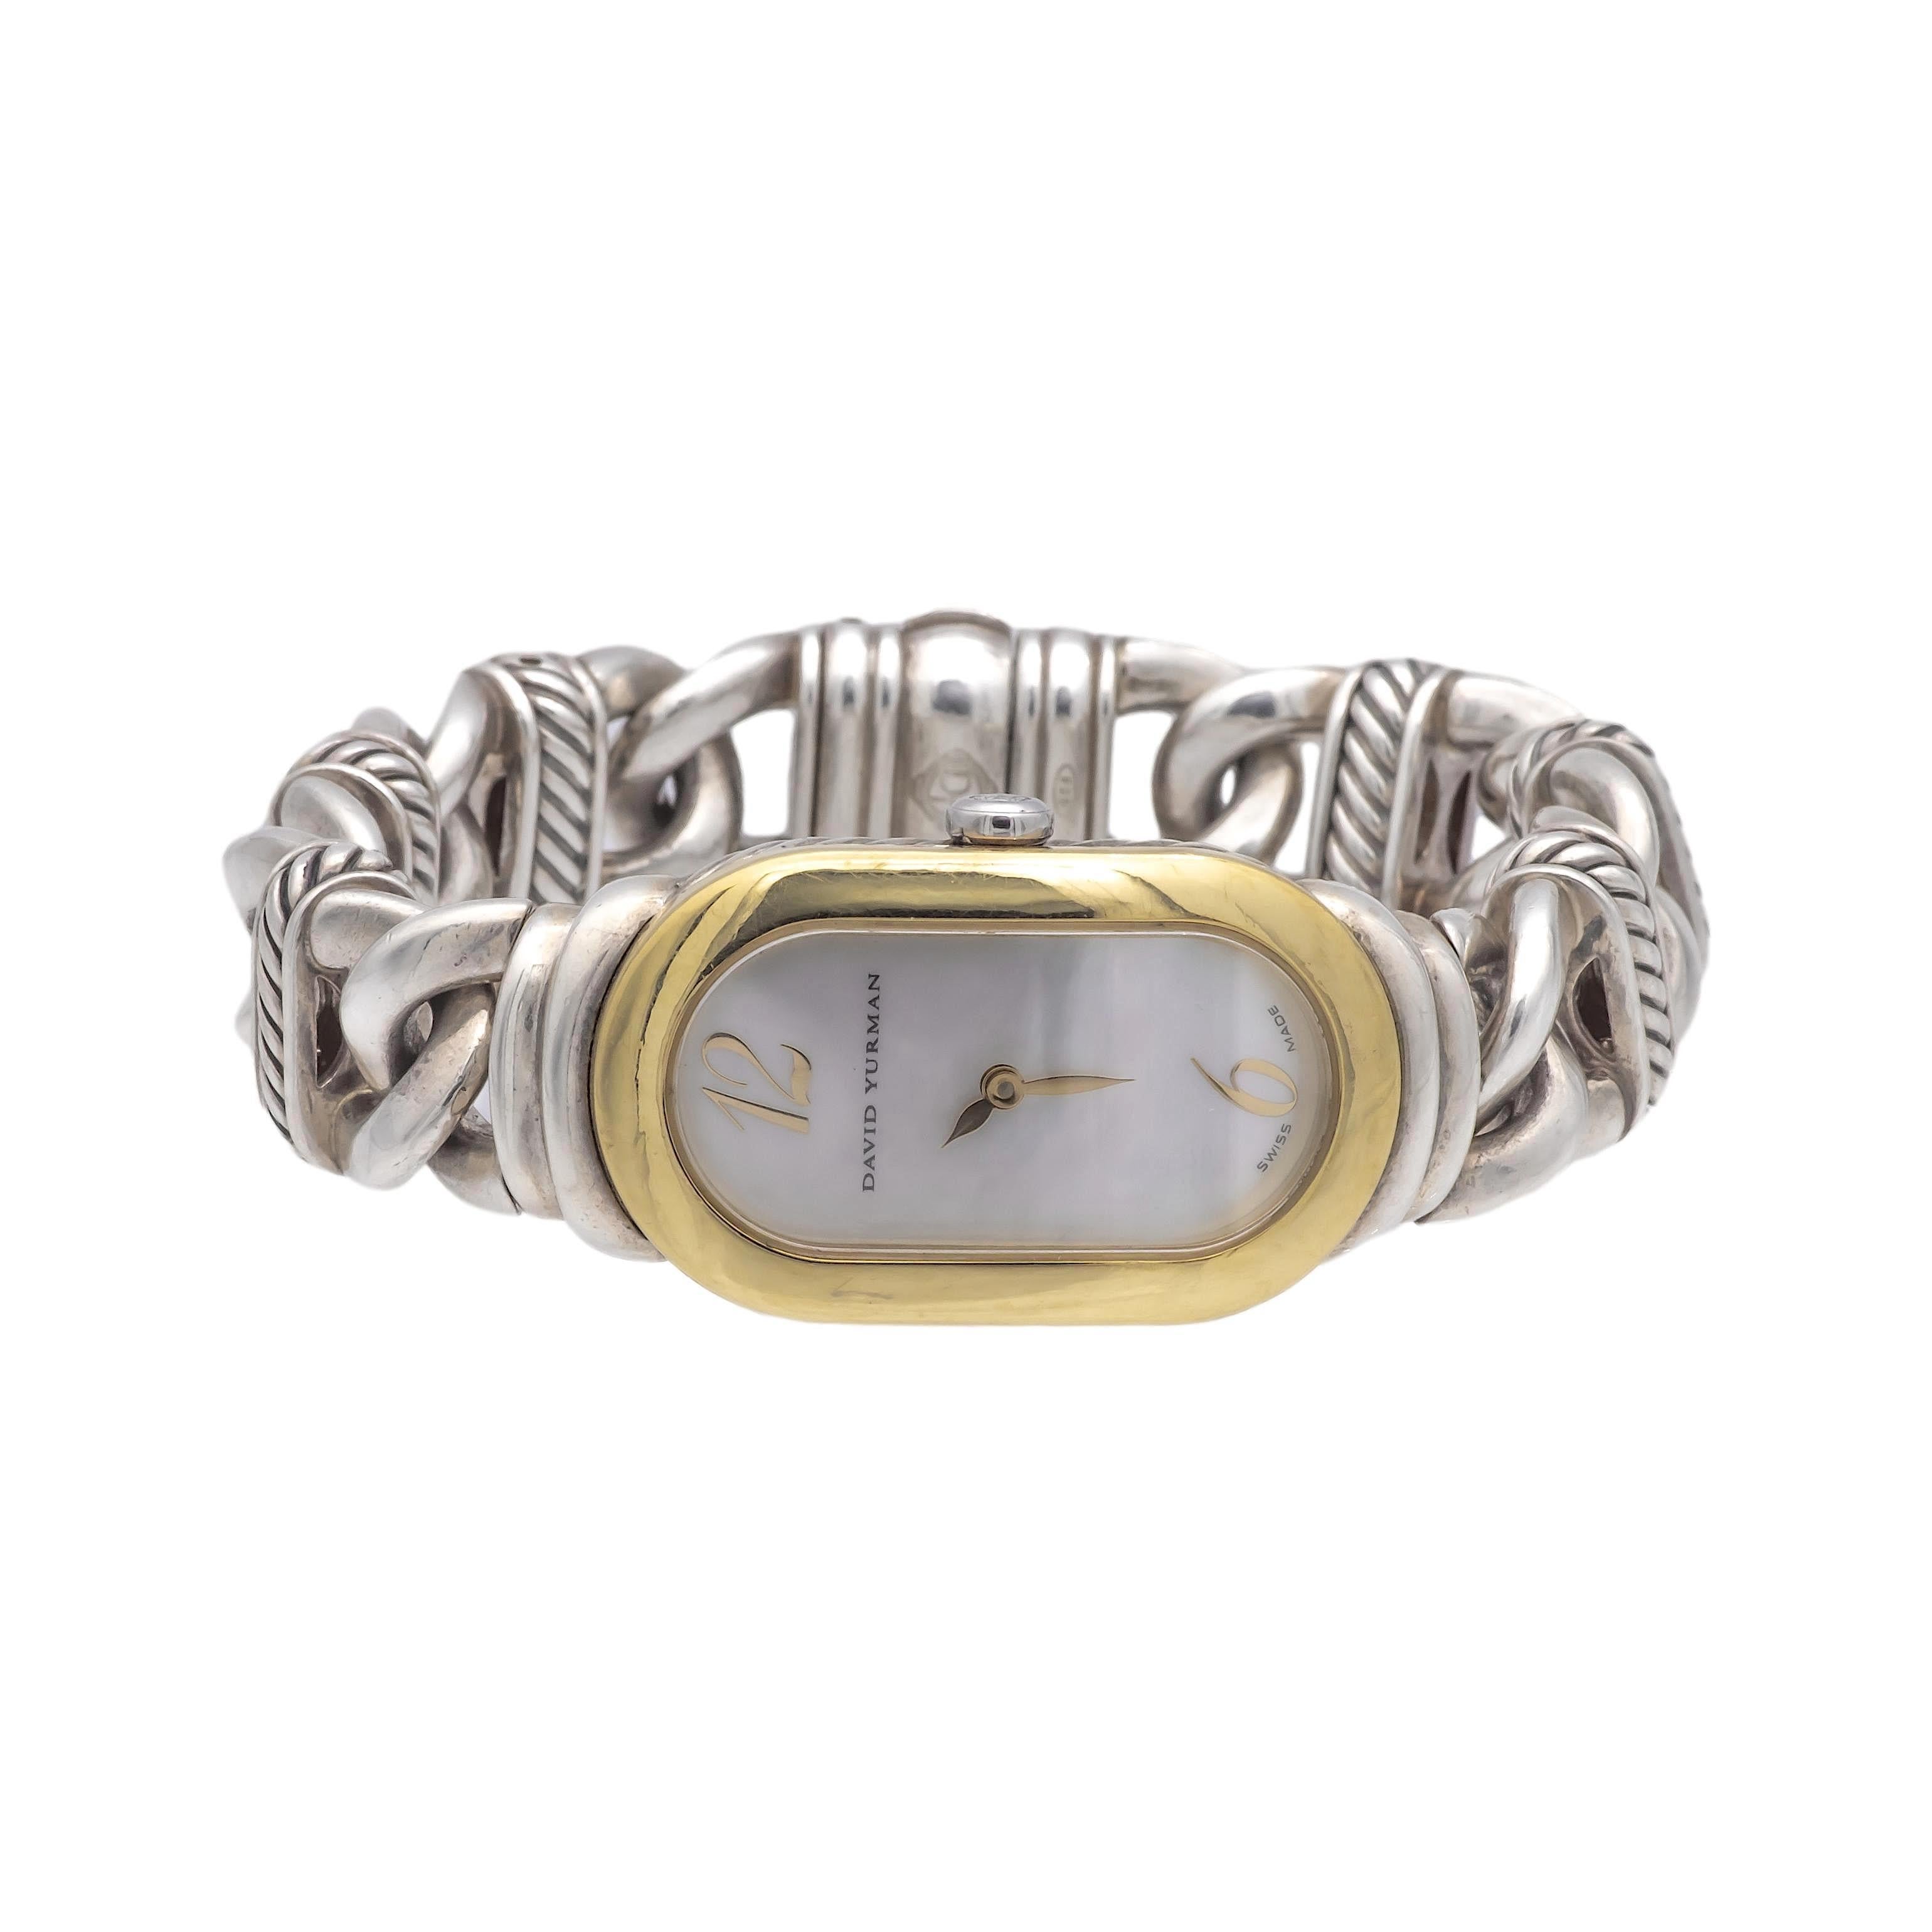 David Yurman ladies watch bracelet from the Madison collection finely crafted in sterling silver with an oval shape mother of pearl face with an 18K yellow gold markers and bezel frame. The watch has a cable link bracelet measuring 6.75 inches long